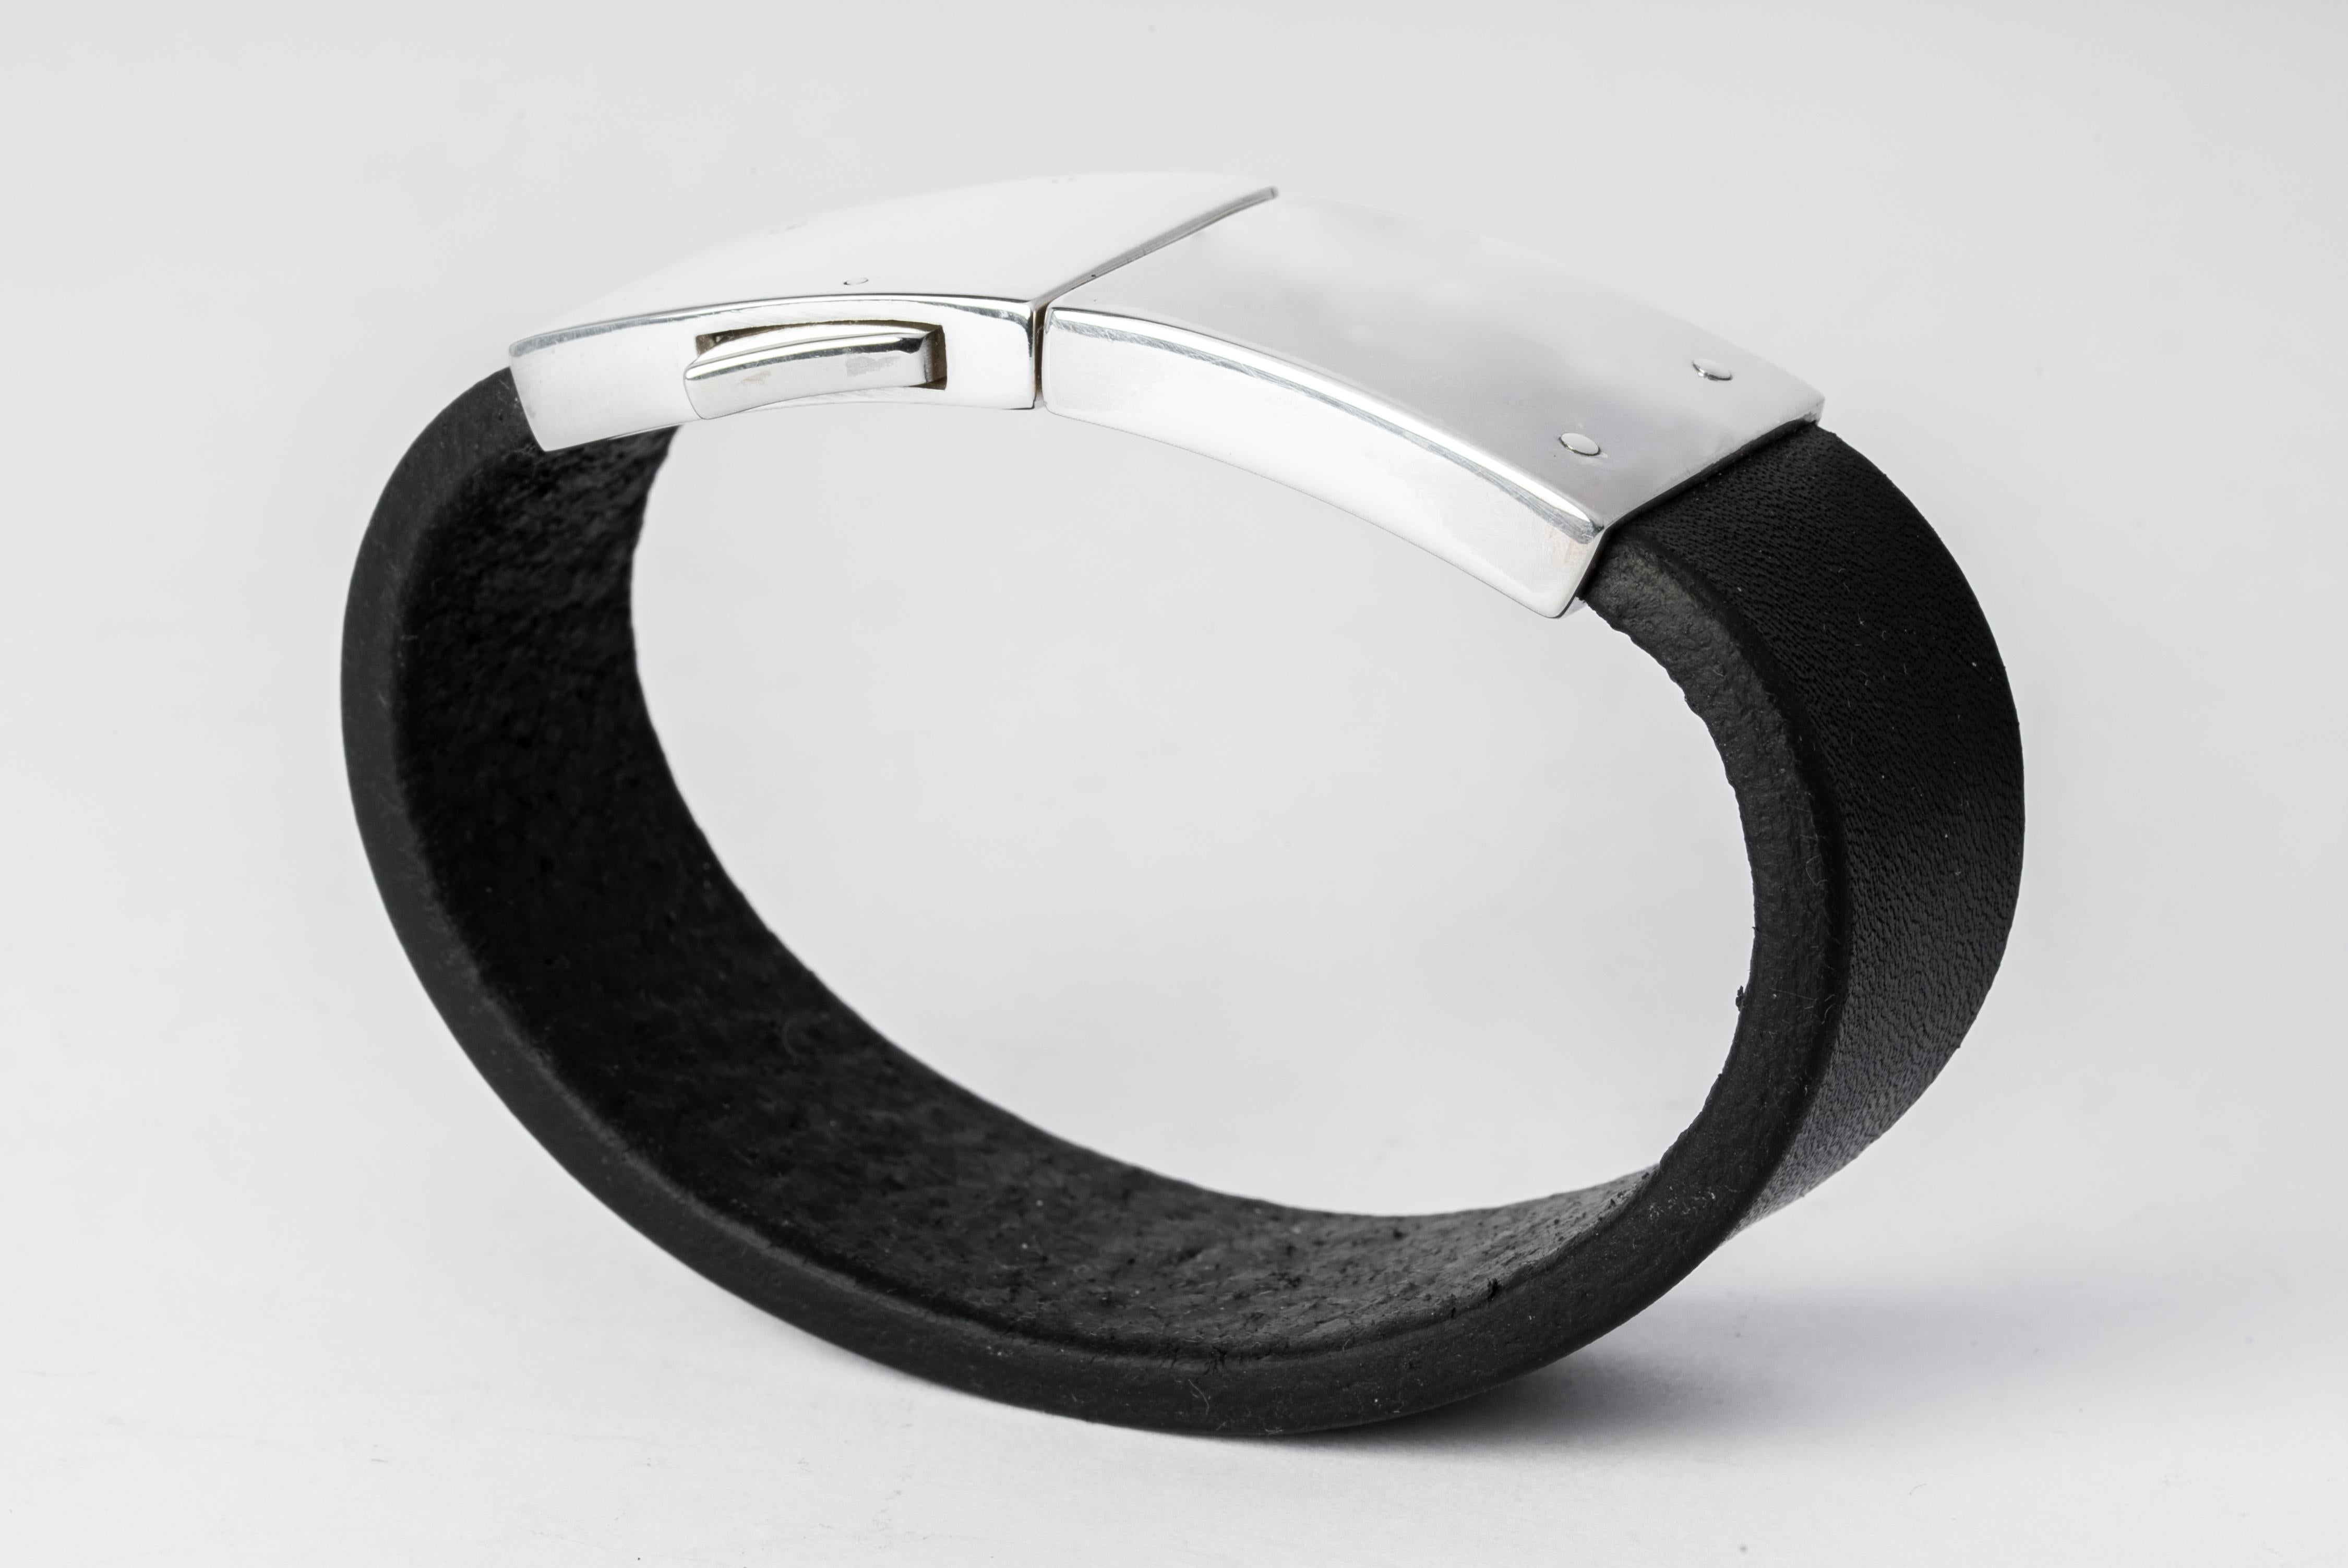 Bracelet in black buffalo leather and polished sterling silver.
Dimensions:
Bracelet width: 25 mm
Weight: 80 grams